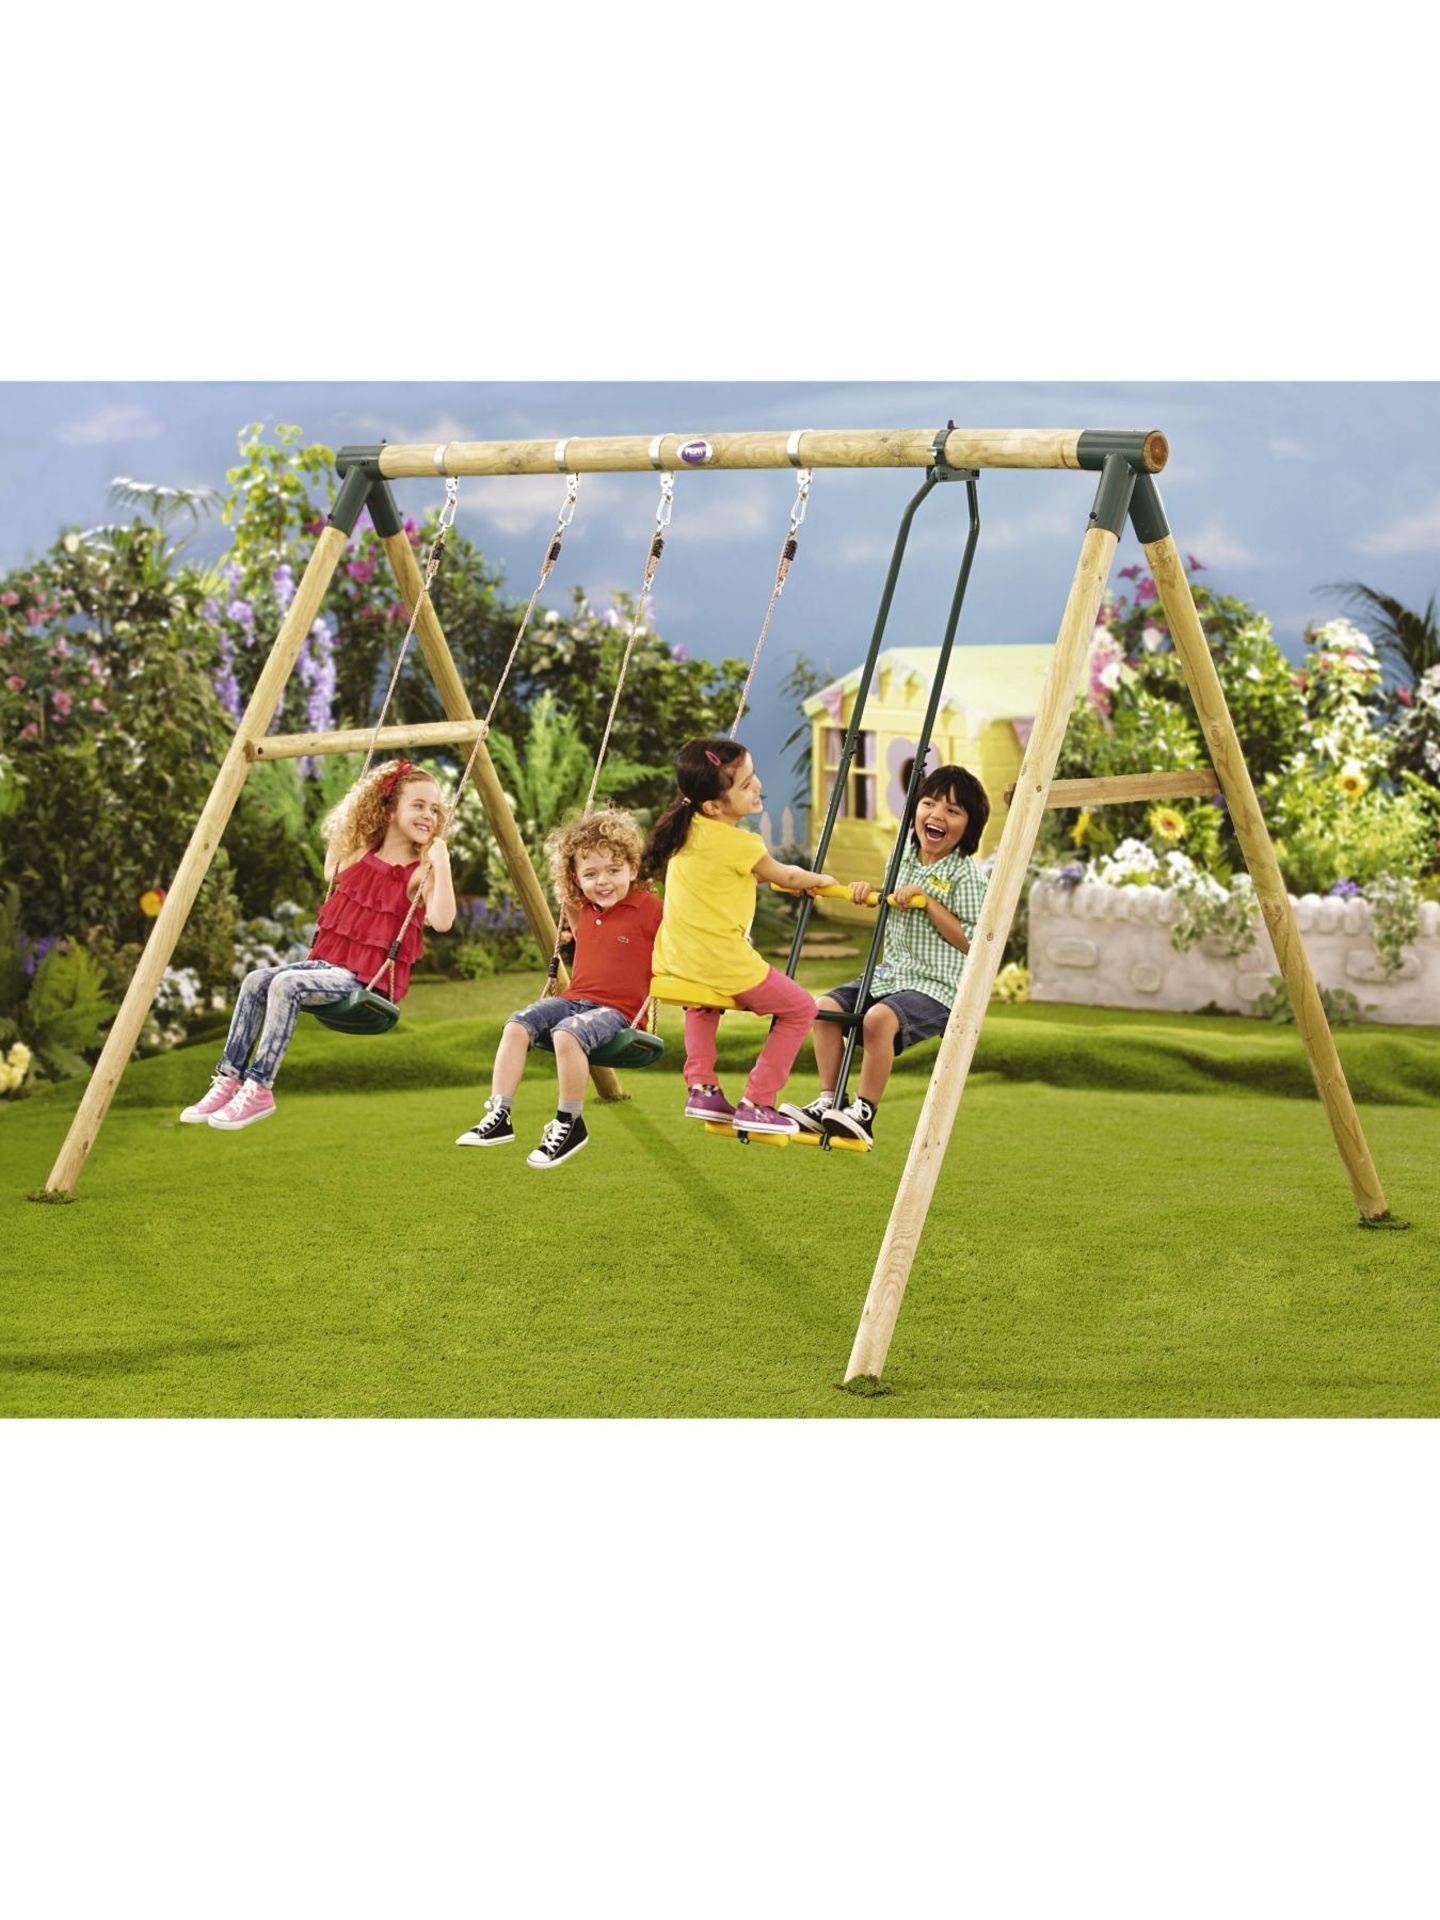 1 x Plum Double Swing with Glider Wooden Garden Swing Set. RRP £249.99. A fabulous swing set for - Image 2 of 2